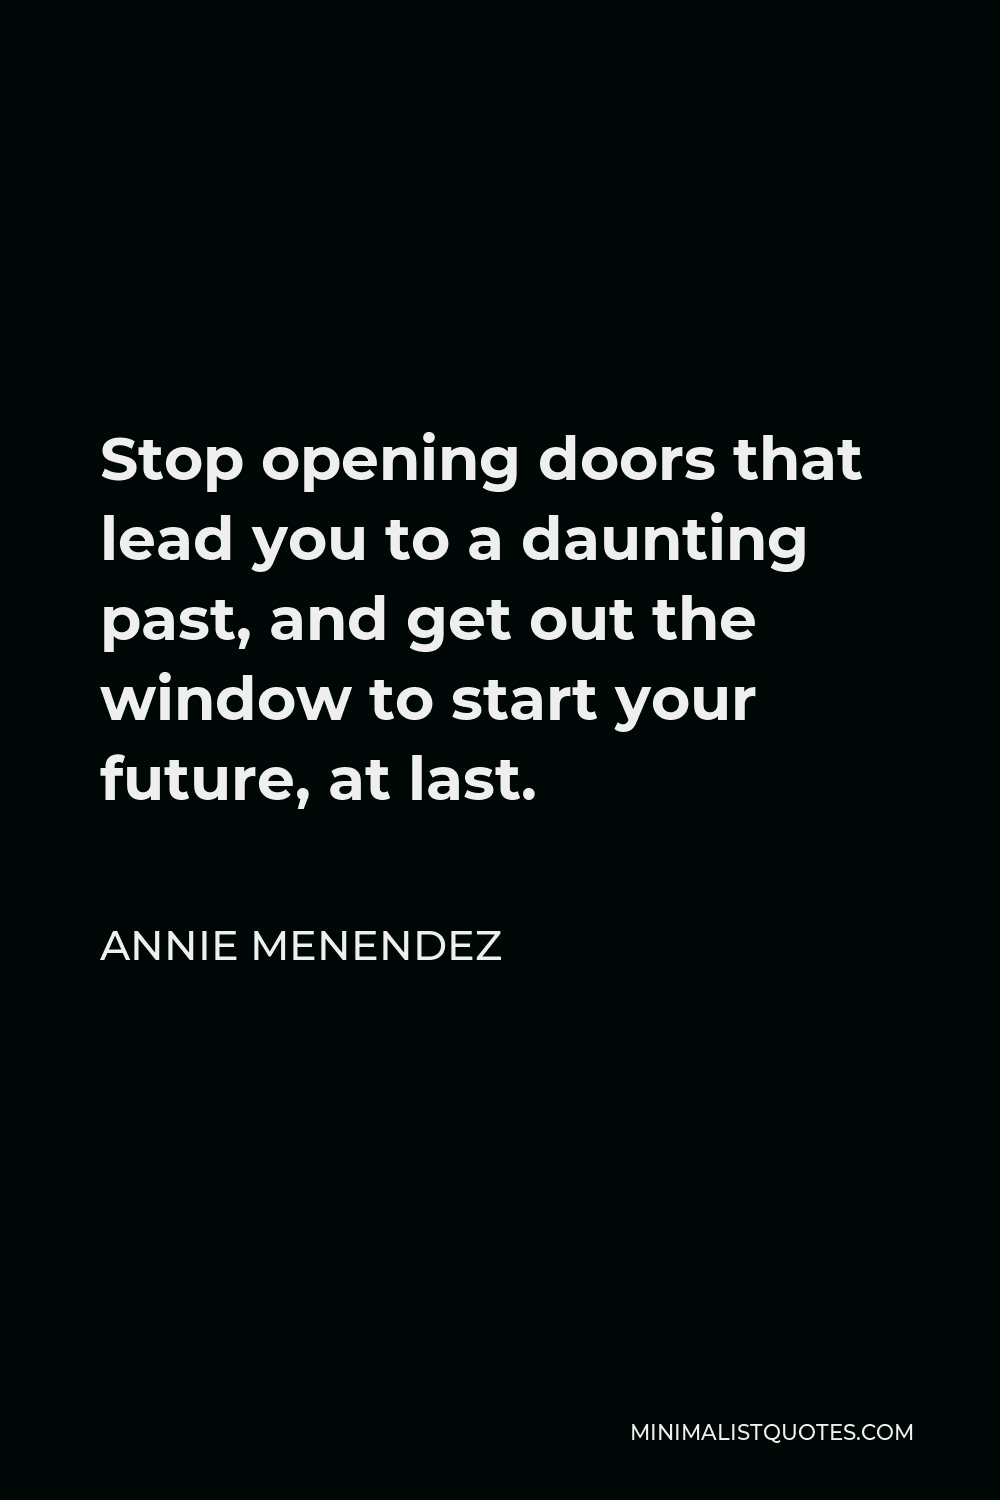 Annie Menendez Quote - Stop opening doors that lead you to a daunting past, and get out the window to start your future, at last.